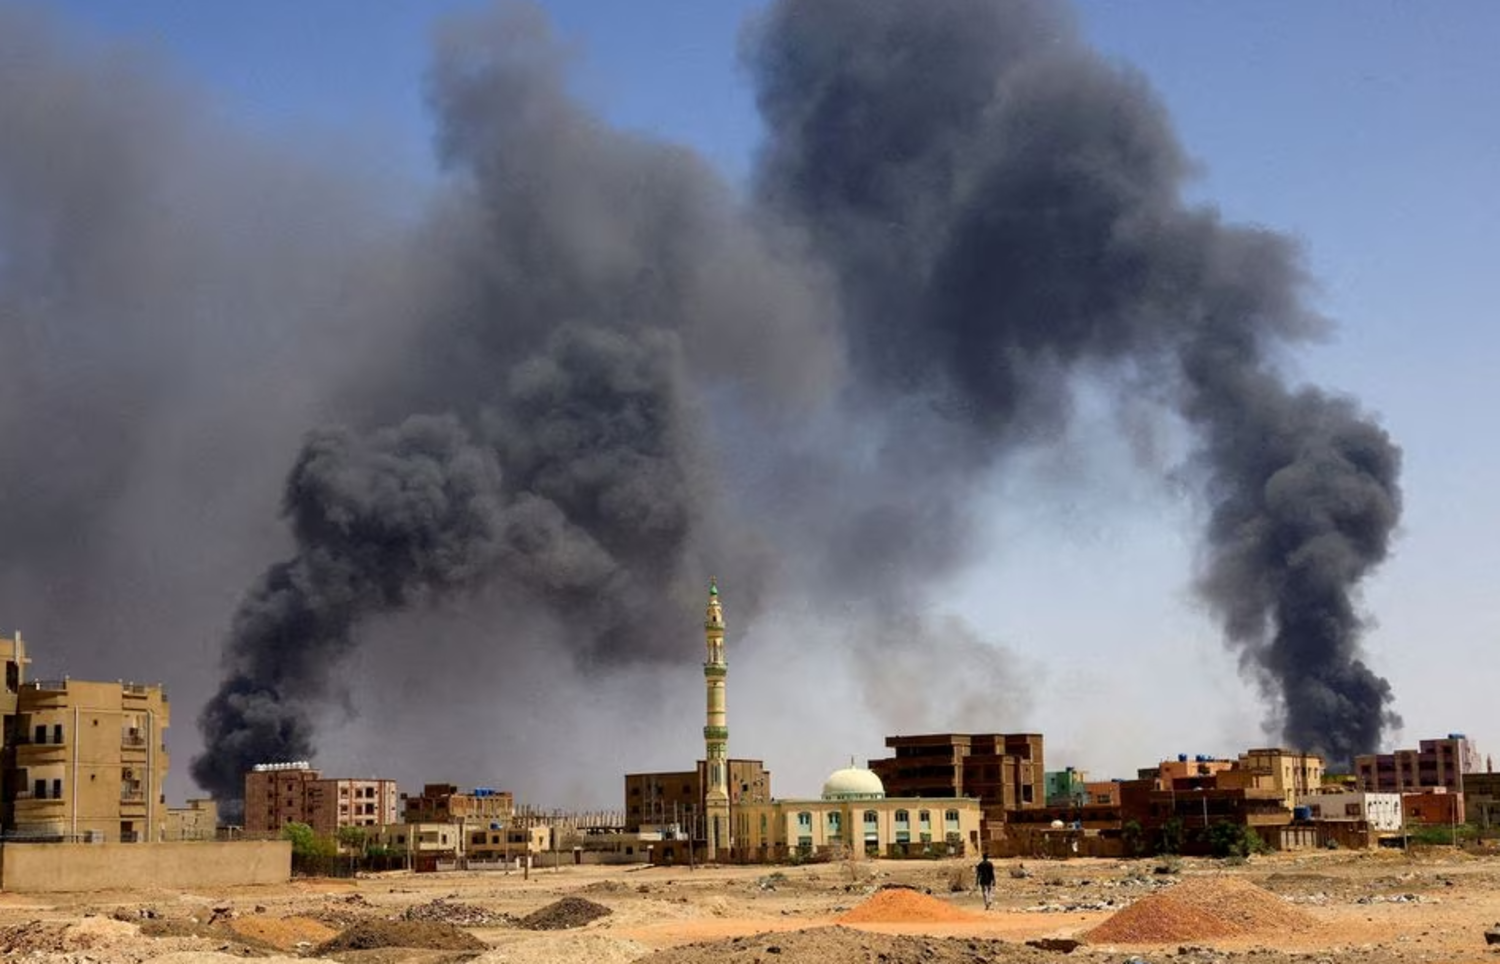 Smoke rises above buildings during clashes between the paramilitary Rapid Support Forces and the army in Khartoum (Reuters)